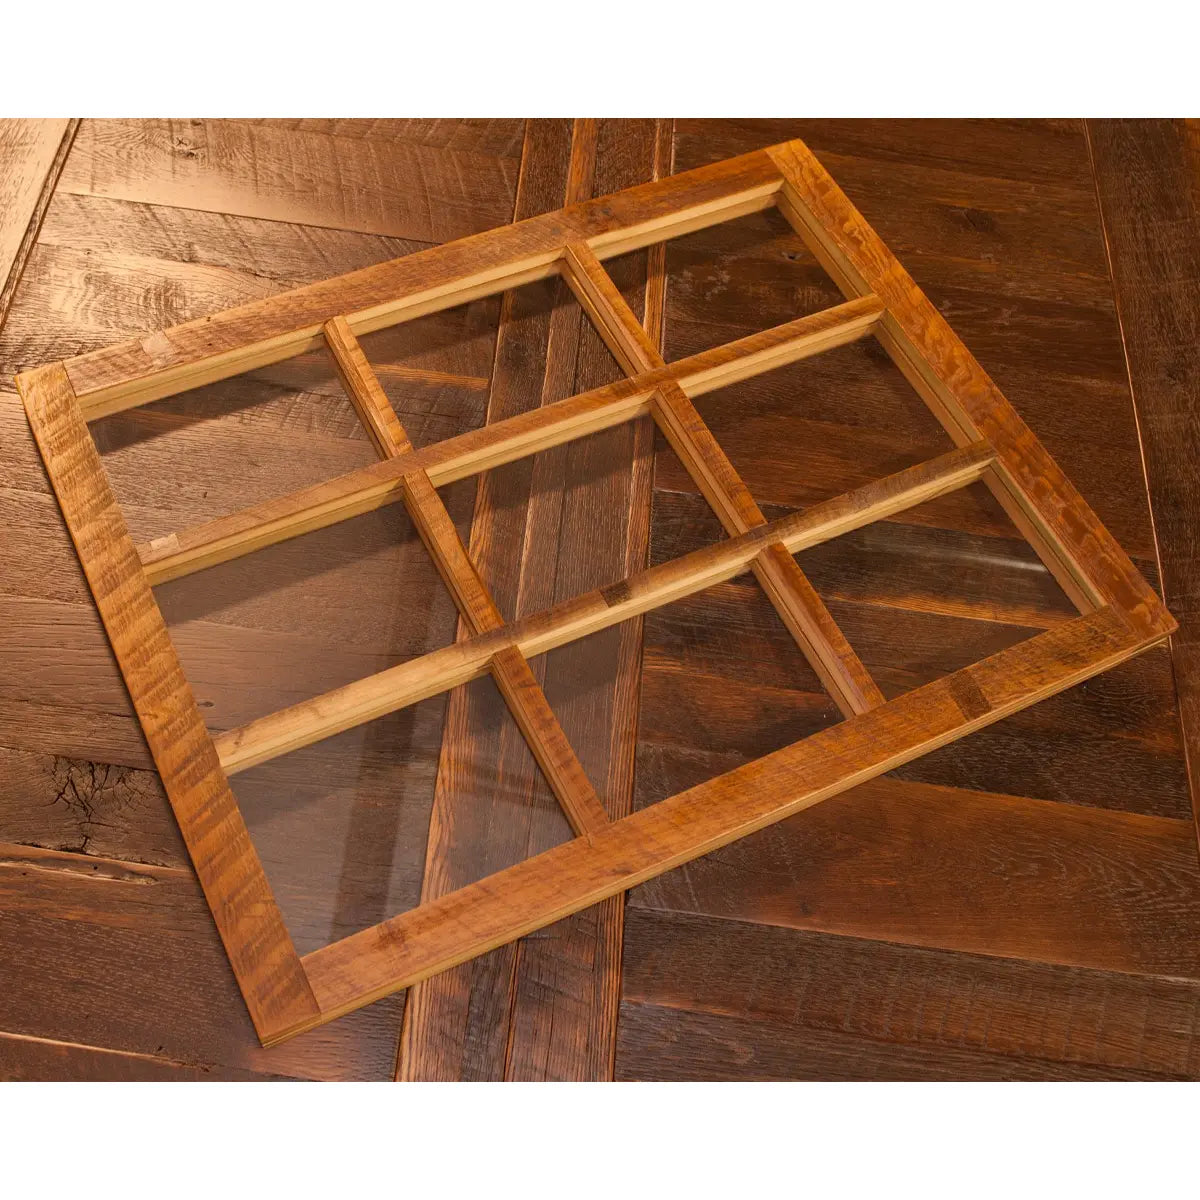 9 opening picture frame barn wood